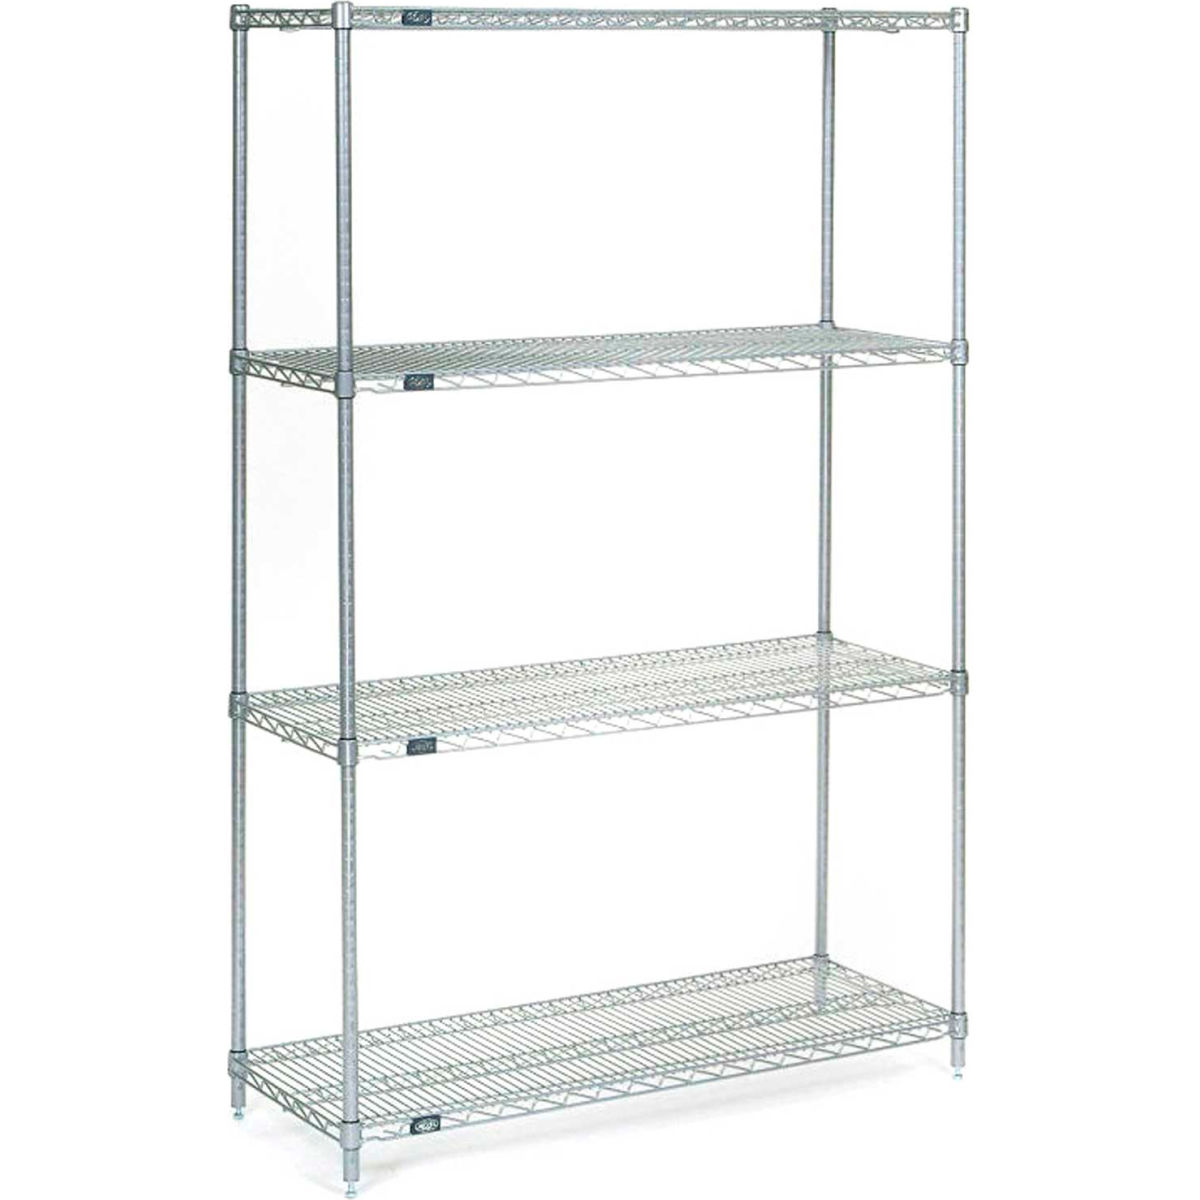 Picture of Global Industrial 14368S 86 x 36 x 14 in. Nexel Stainless Steel Starter Wire Shelving